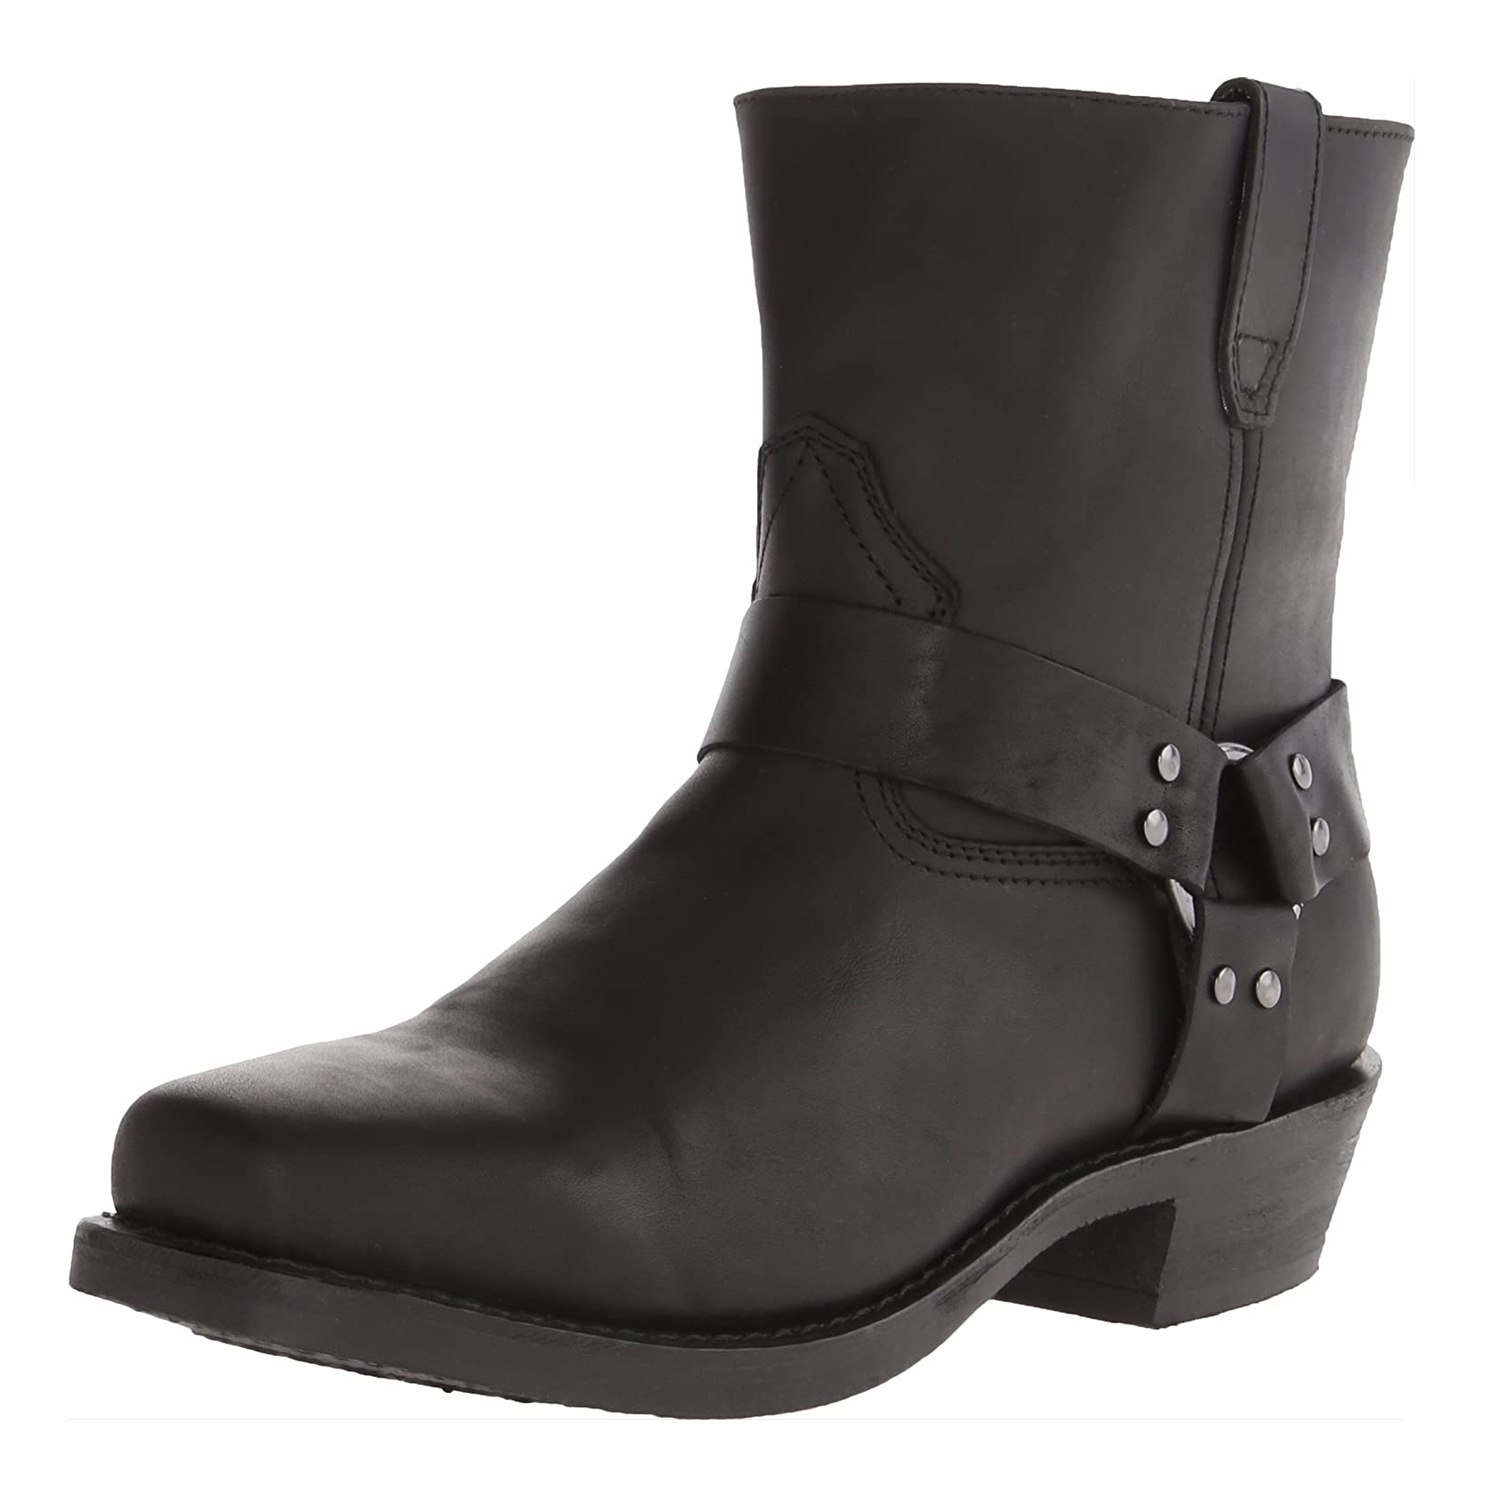 MEN'S BUCKLE CAVED ANKLE BOOTS